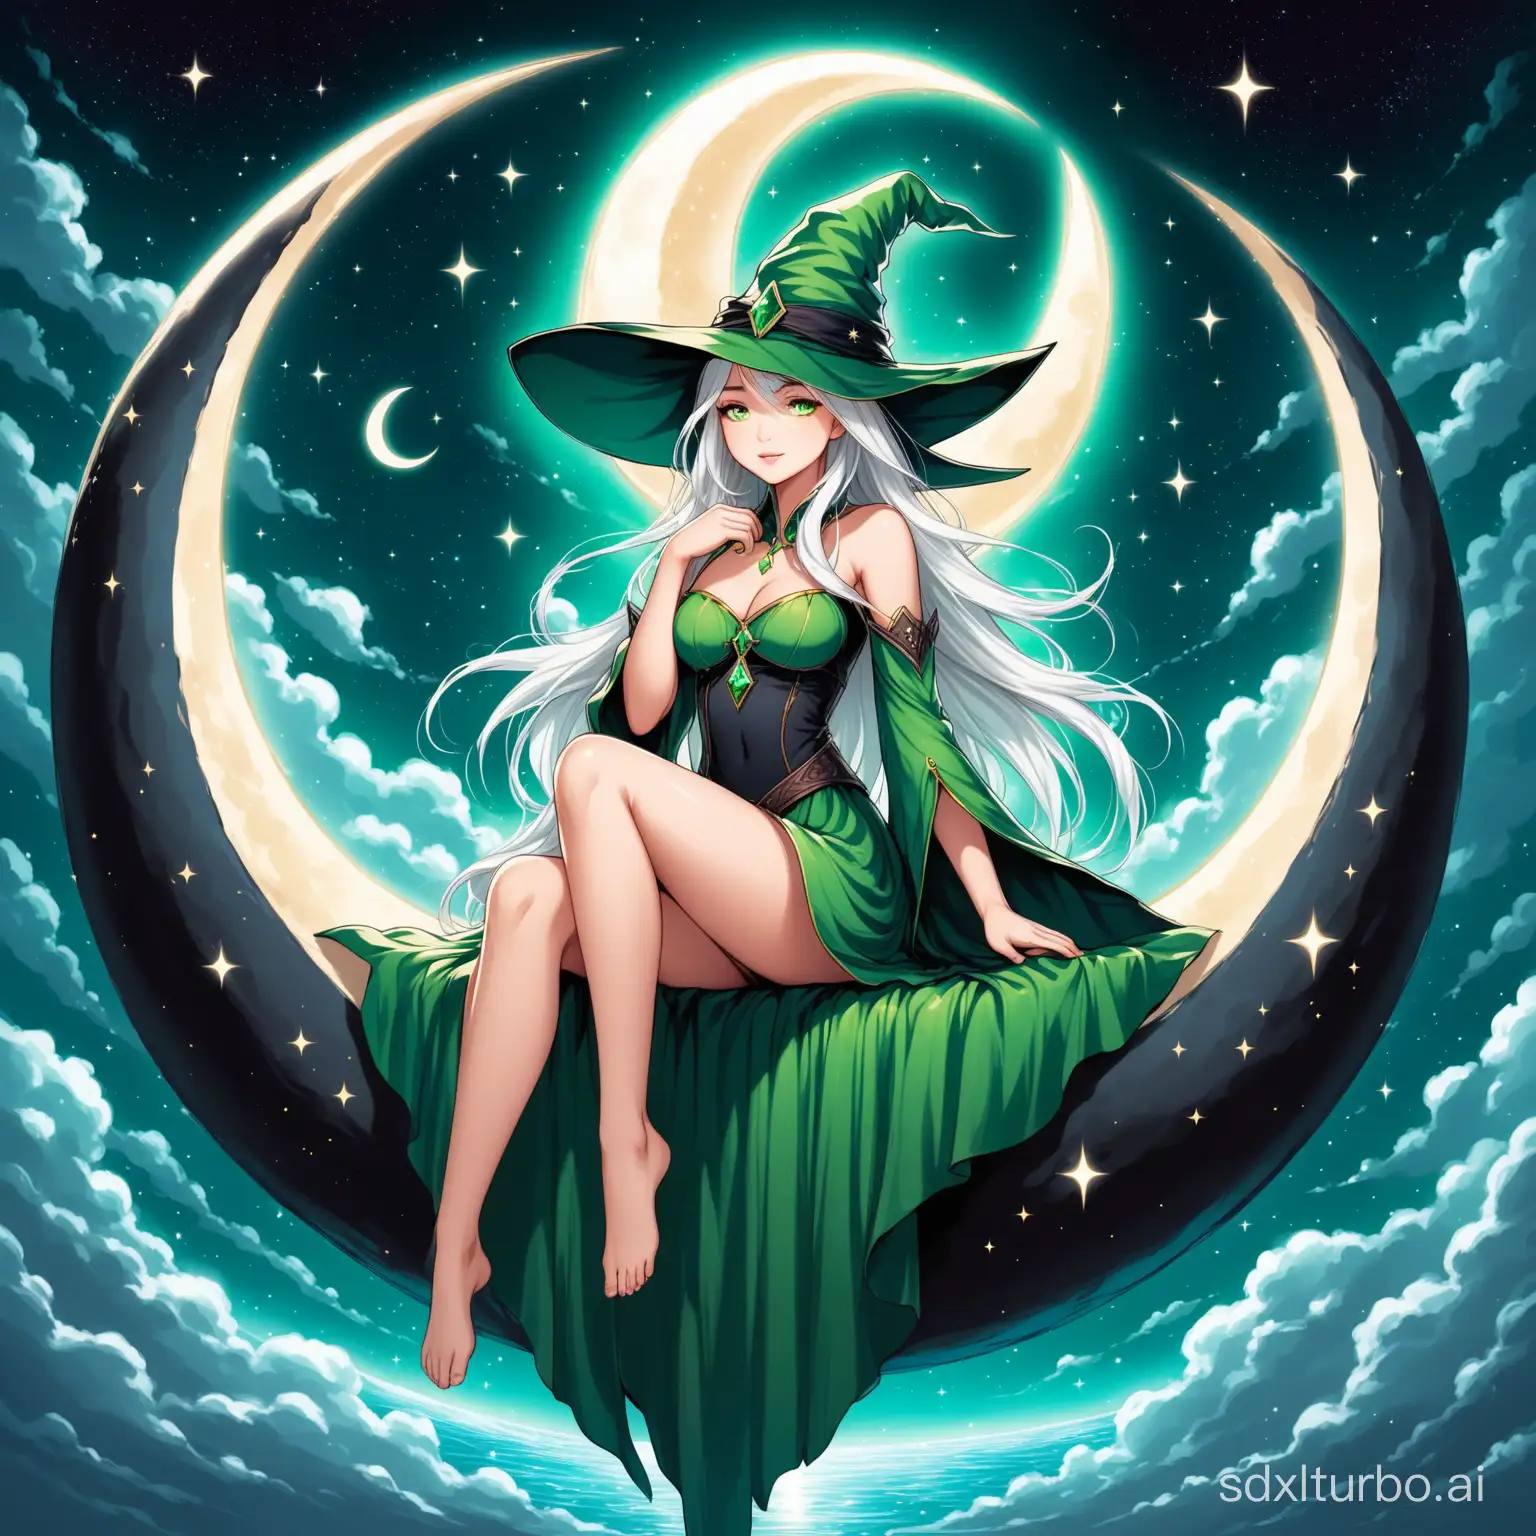 beautiful girl with  green witch hat and medium flowing  white hair, sitting inside the crest of the crescent moon, fantasy style